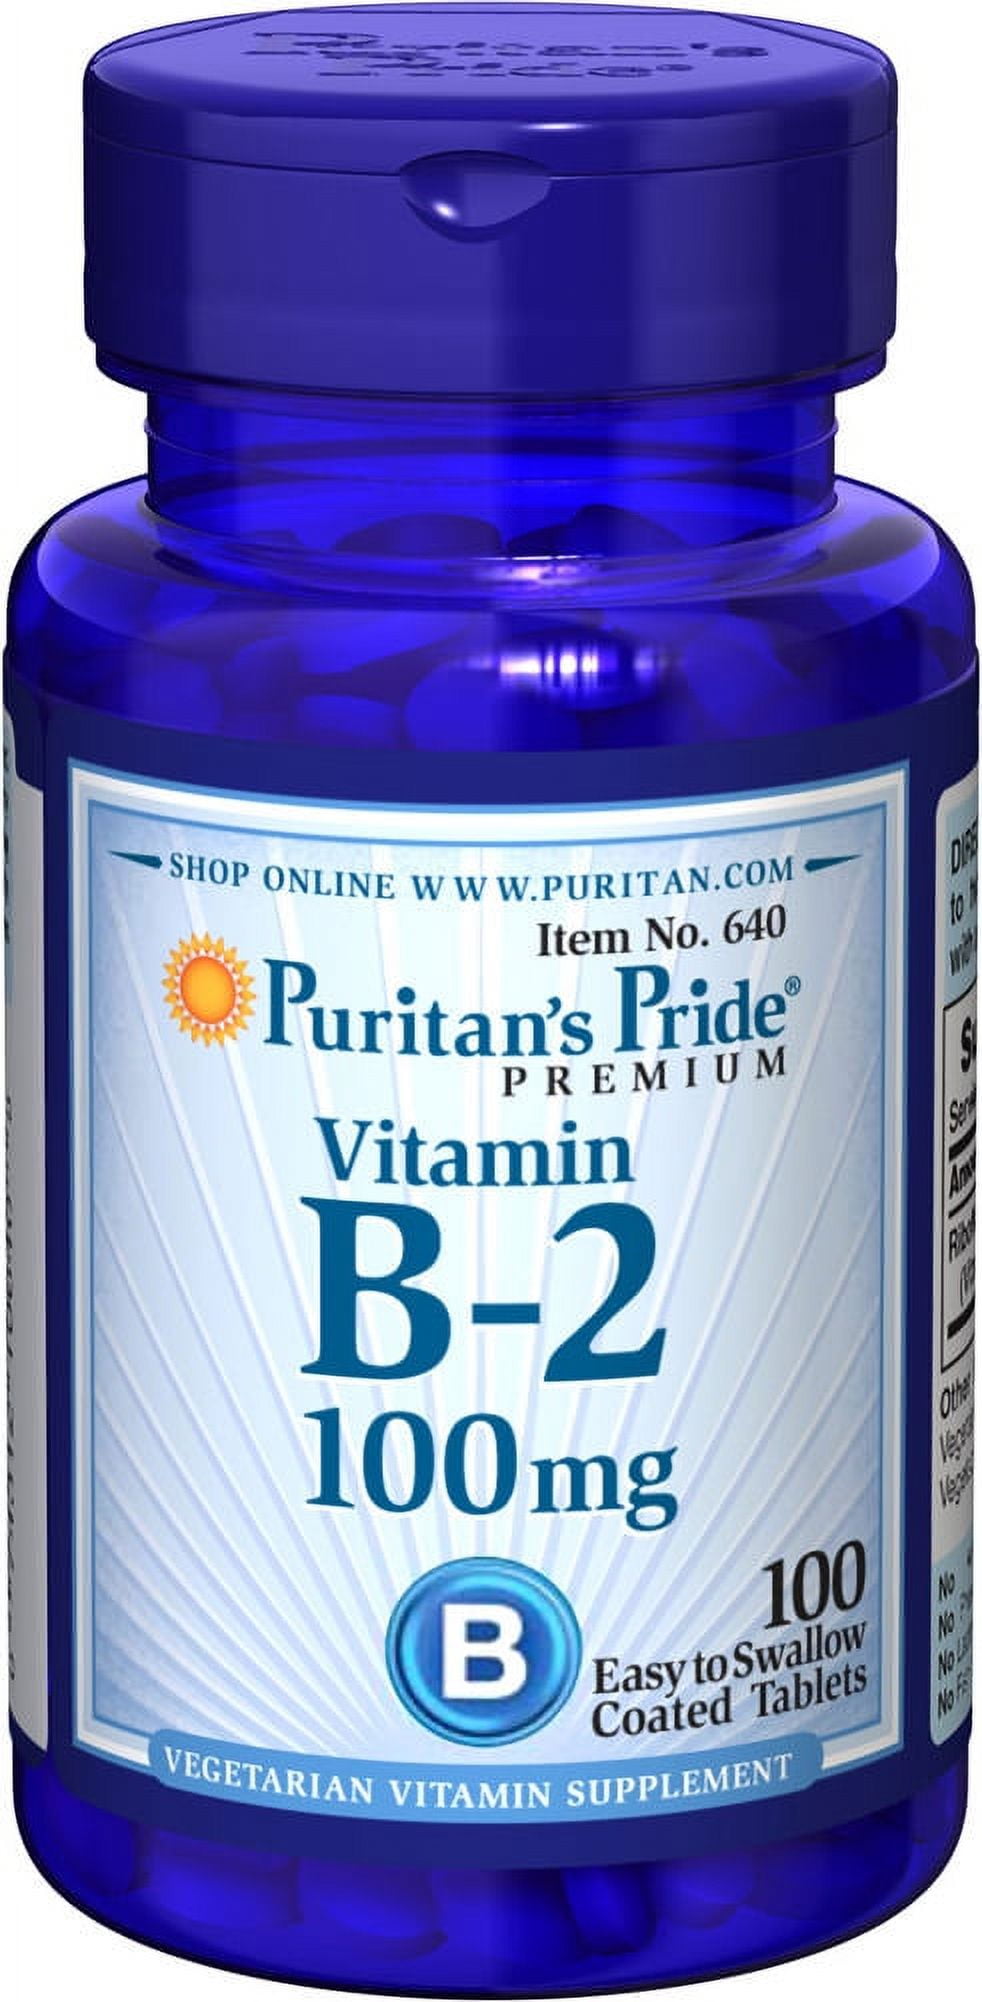 All vitamins - vitamin supplements - Imported Products from USA - iBhejo